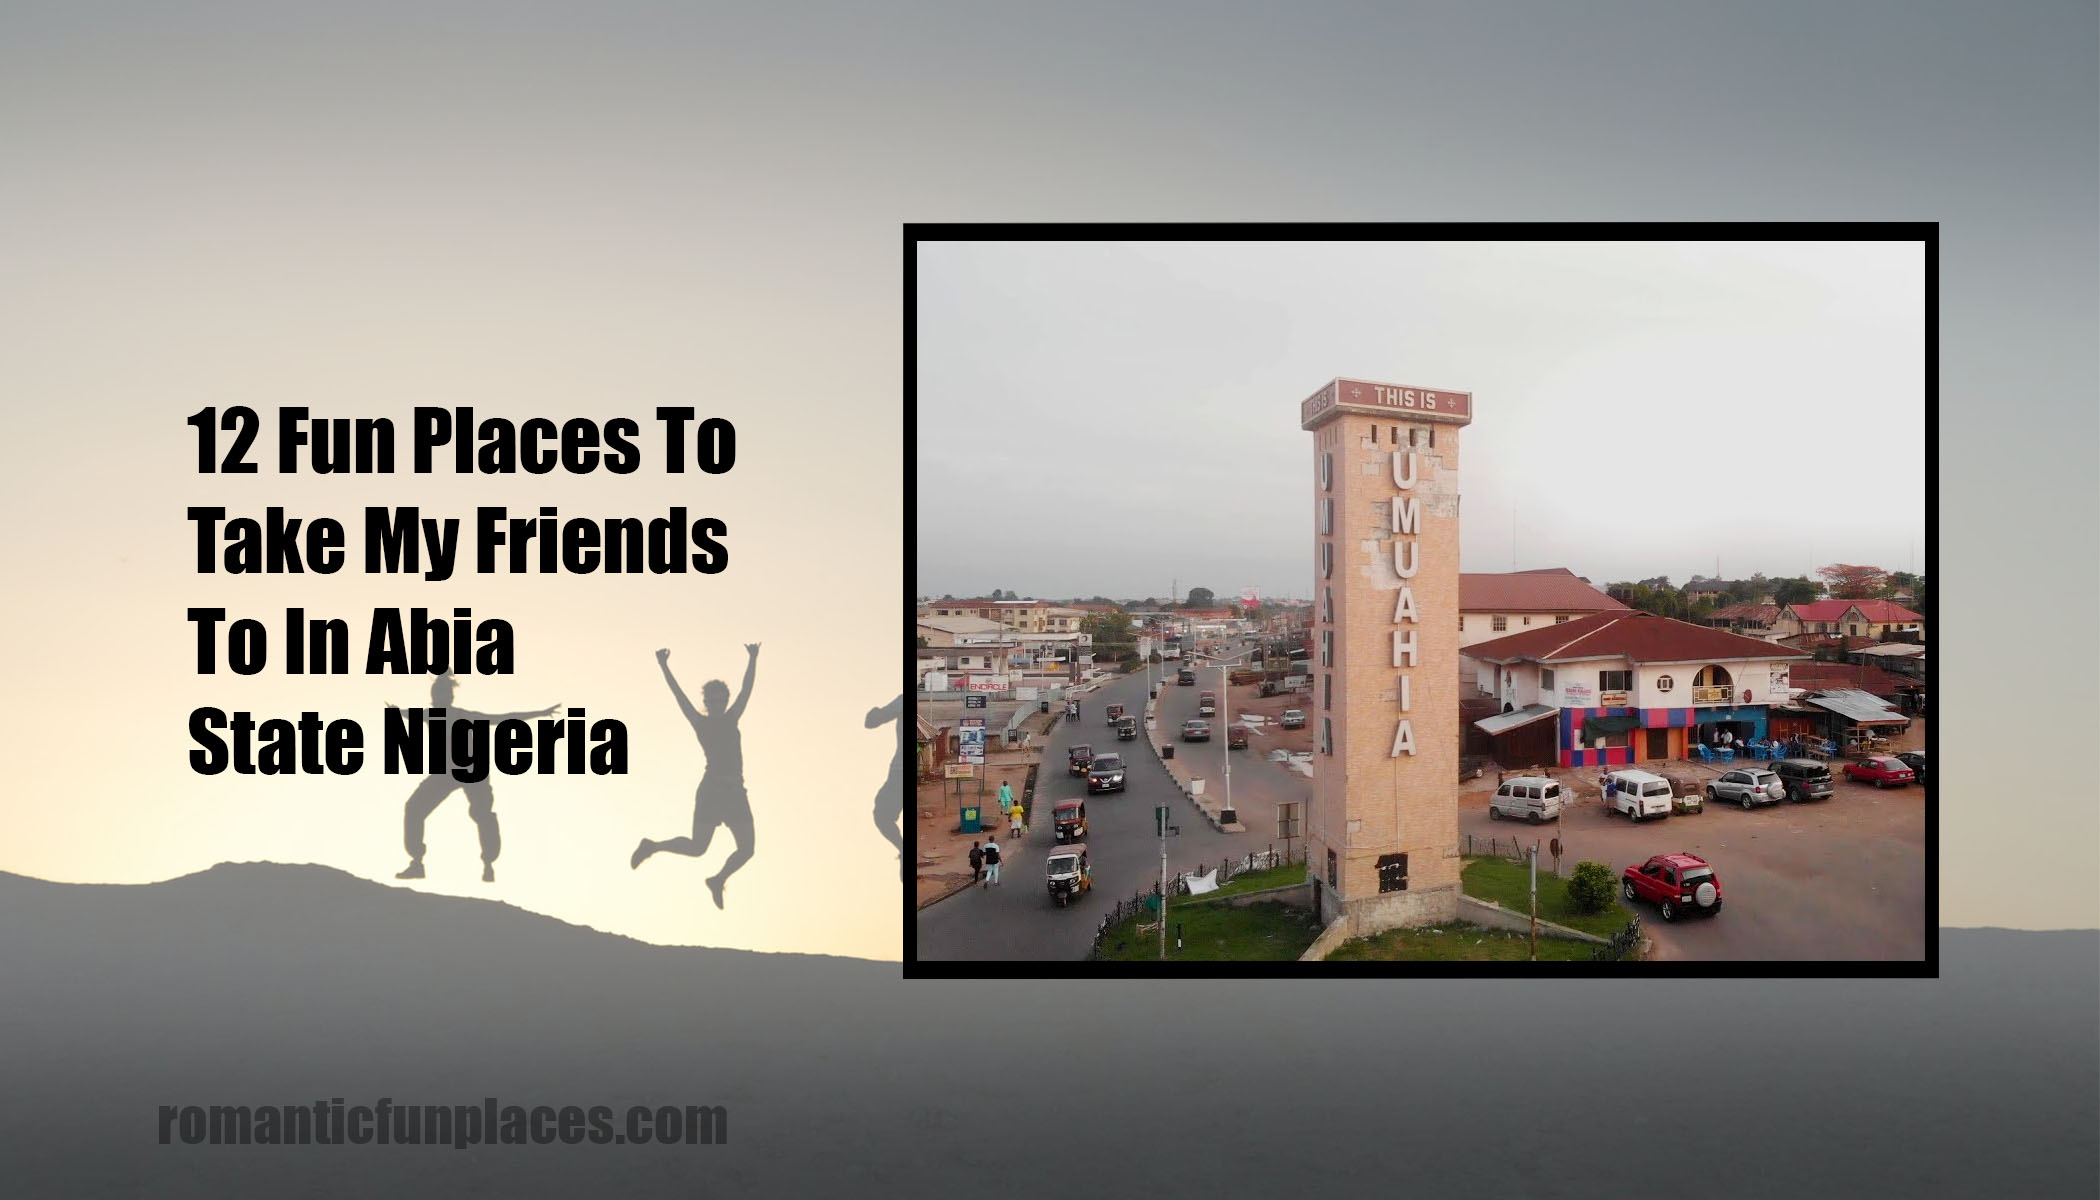 12 Fun Places To Take My Friends To In Abia State Nigeria